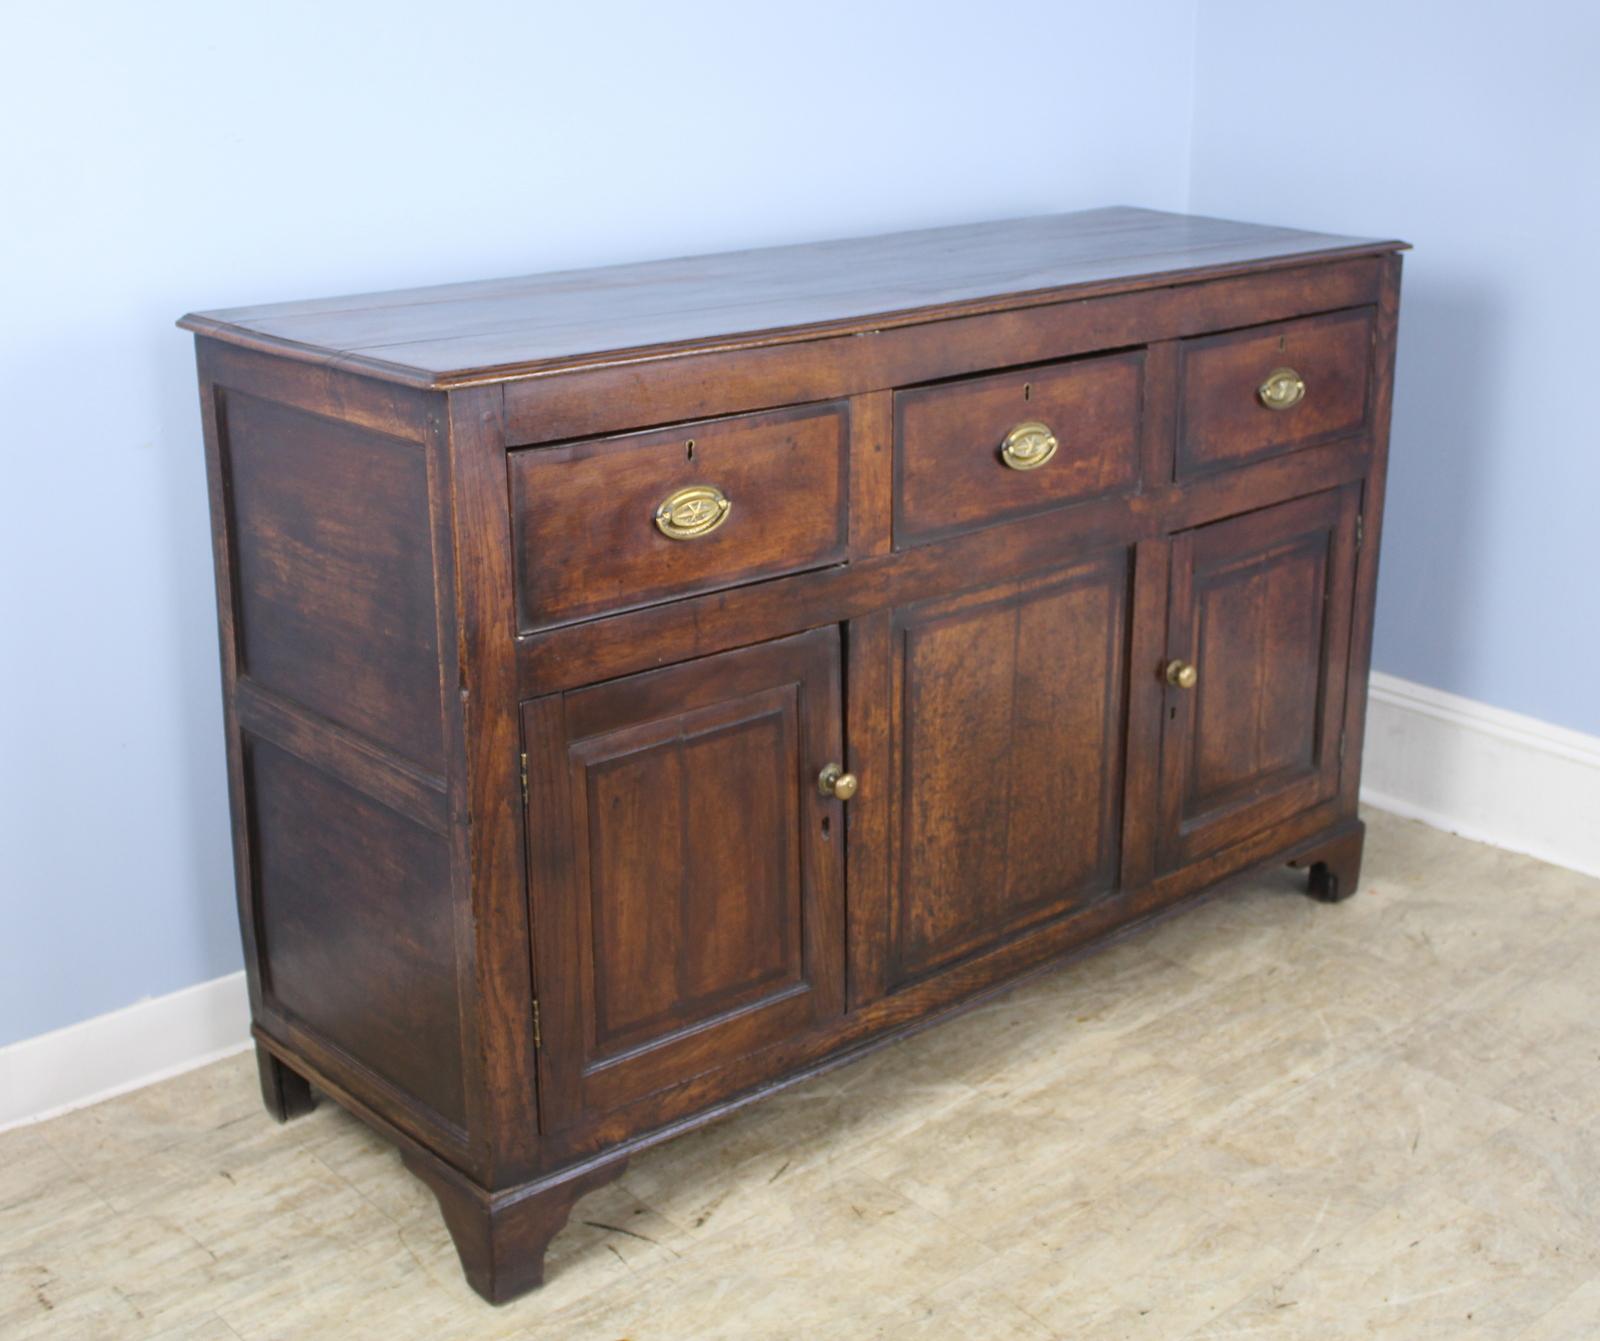 A handsome and quite early dresser base, buffet, or cupboard in dark oak with mahogany crossbanding. The center section is closed with a front panel and the interior is two equal storage sections with a half shelf. Doors shut well with turn latches